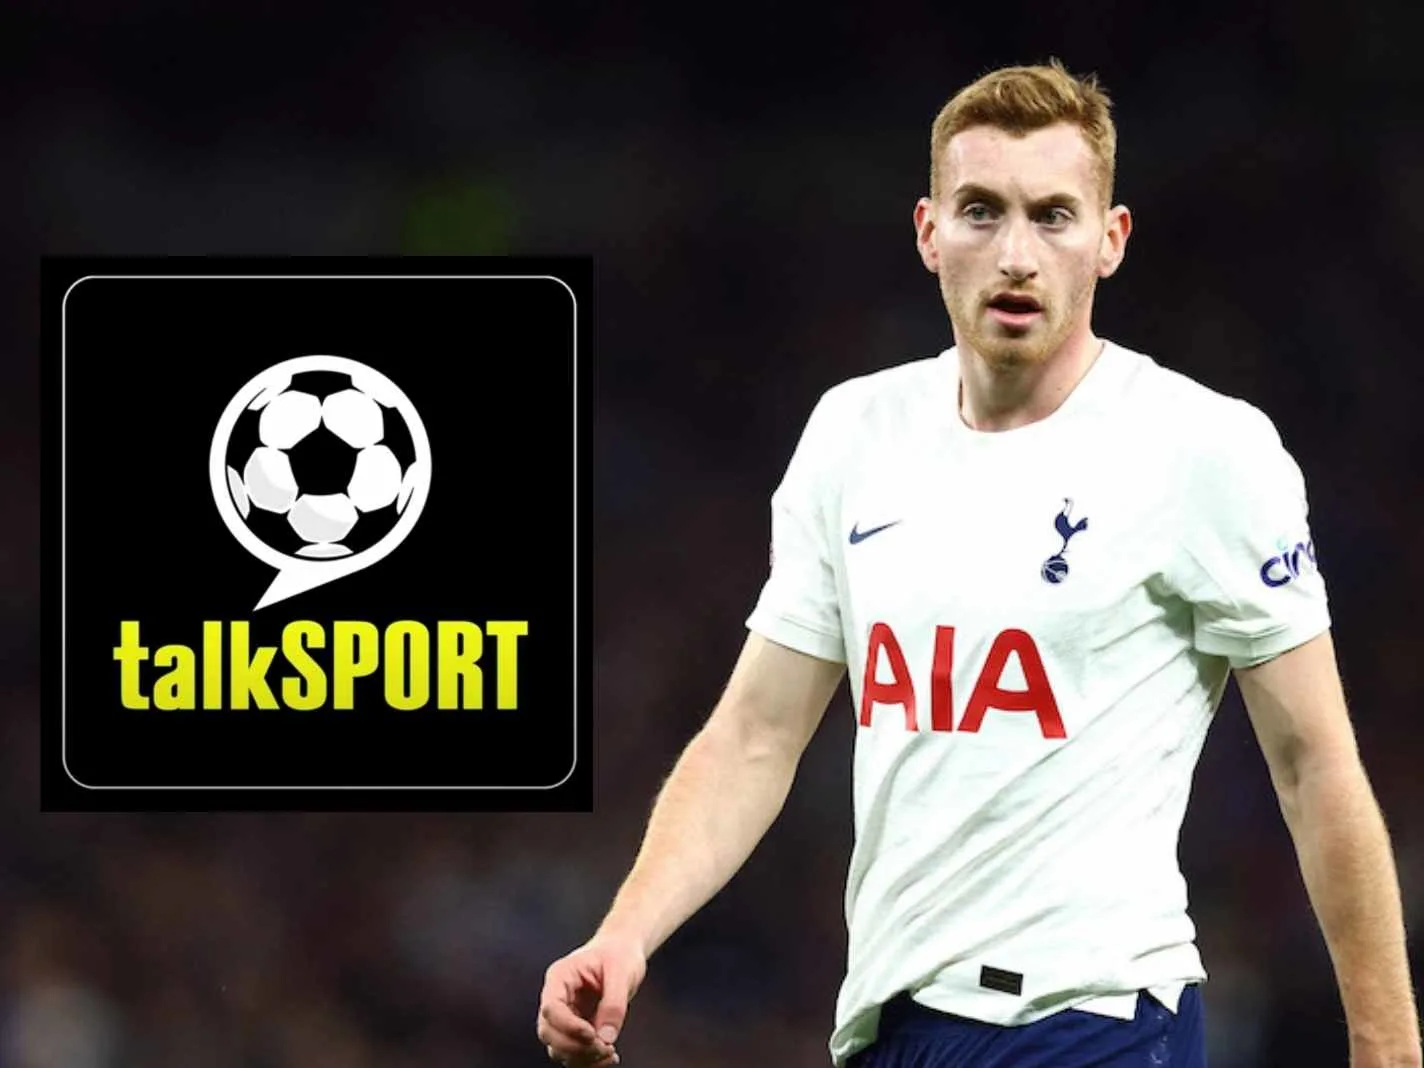 Spurs admin makes reference to famous Talksport caller with Kulusevski tweet